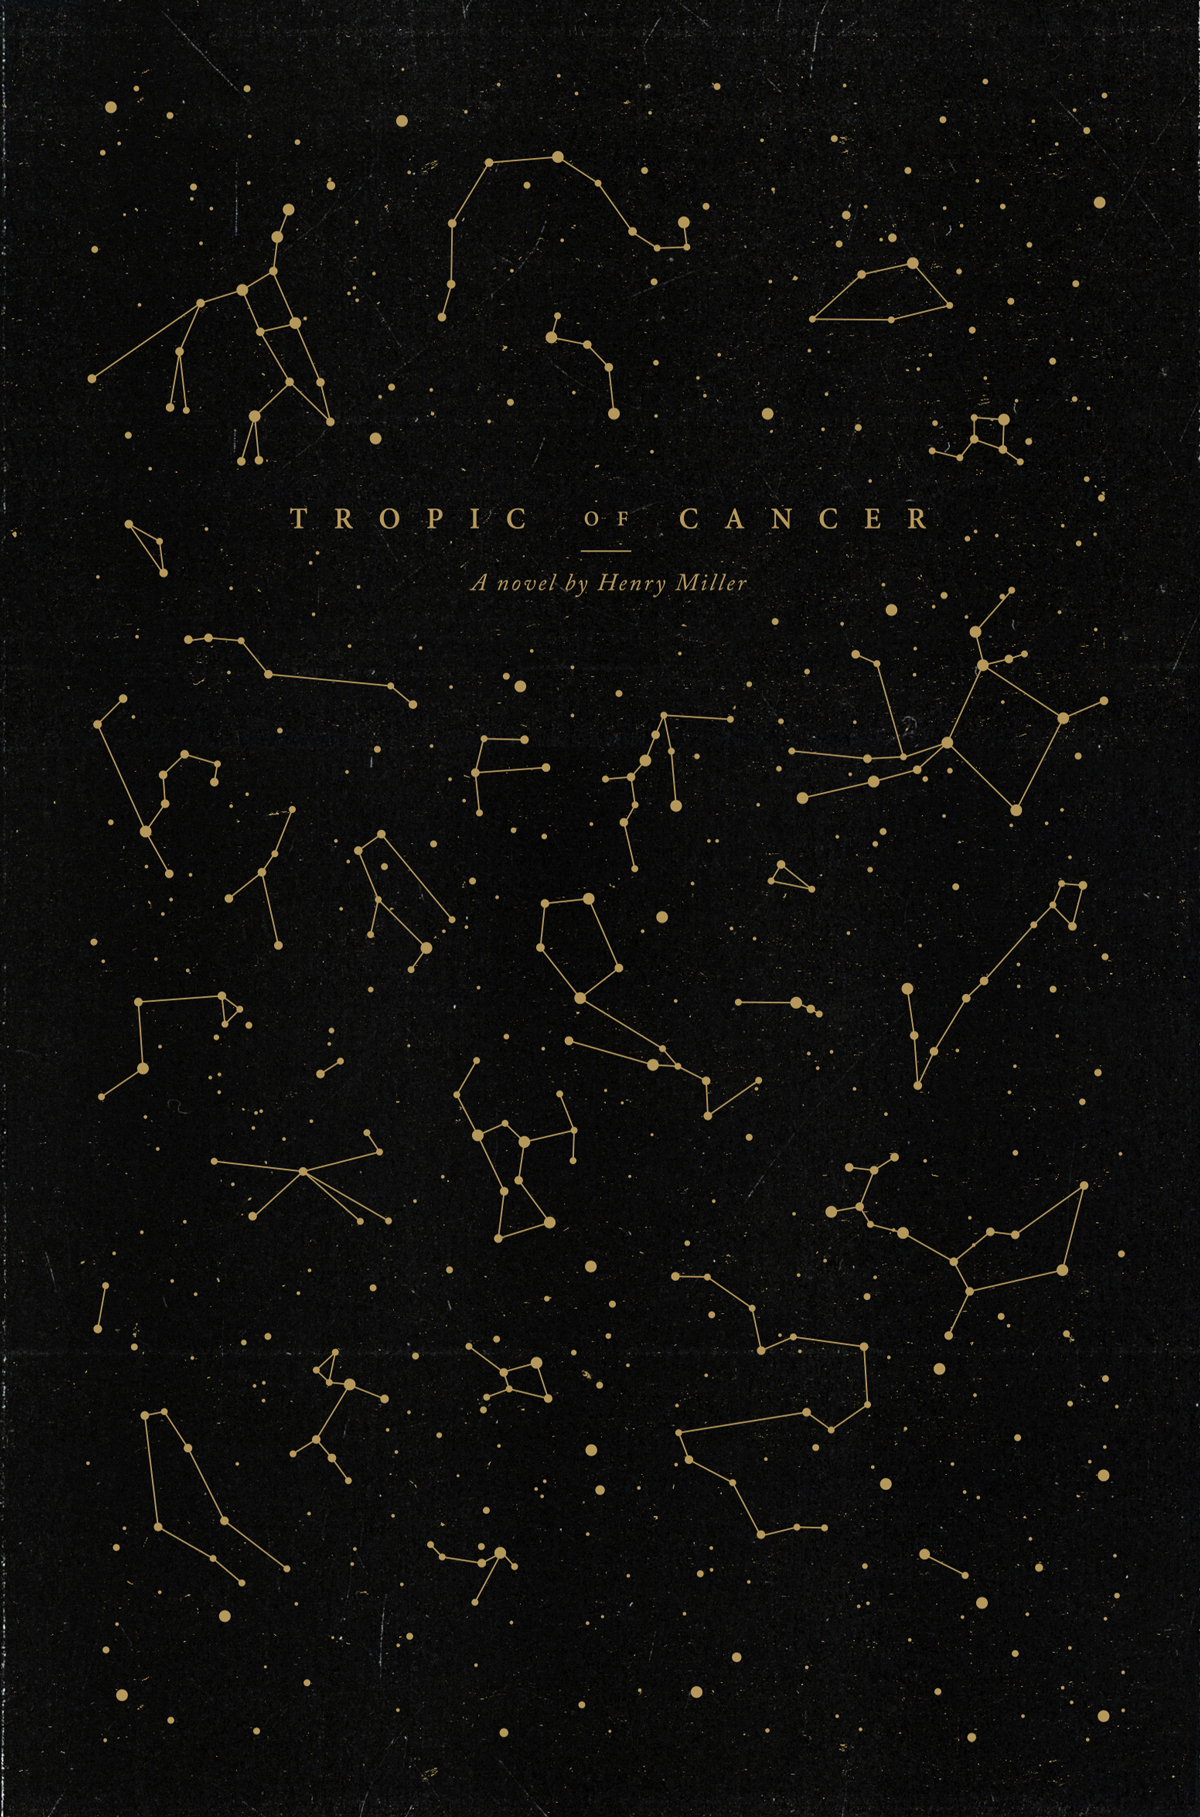 tropic of cancer Henry Miller tropic of capricorn type book book cover cover design re-design stars Constellations texture